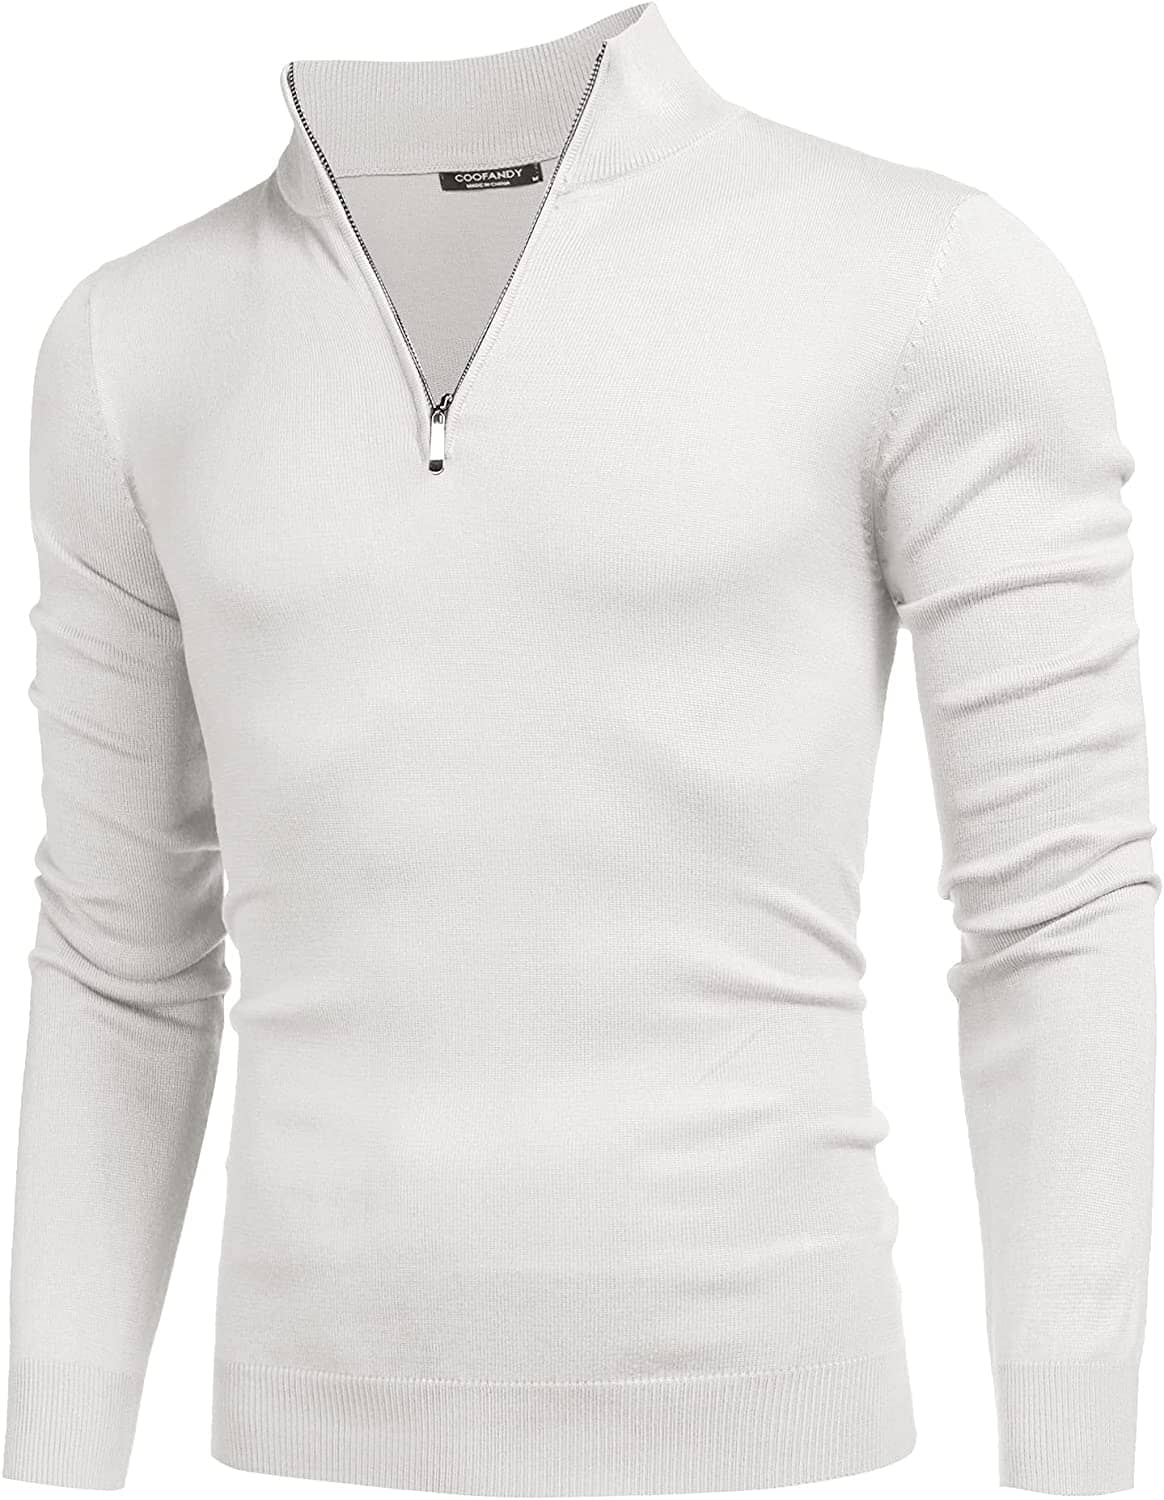 Zip Up Slim Fit Lightweight Pullover Polo Sweater (US Only) Fashion Hoodies & Sweatshirts COOFANDY Store White S 